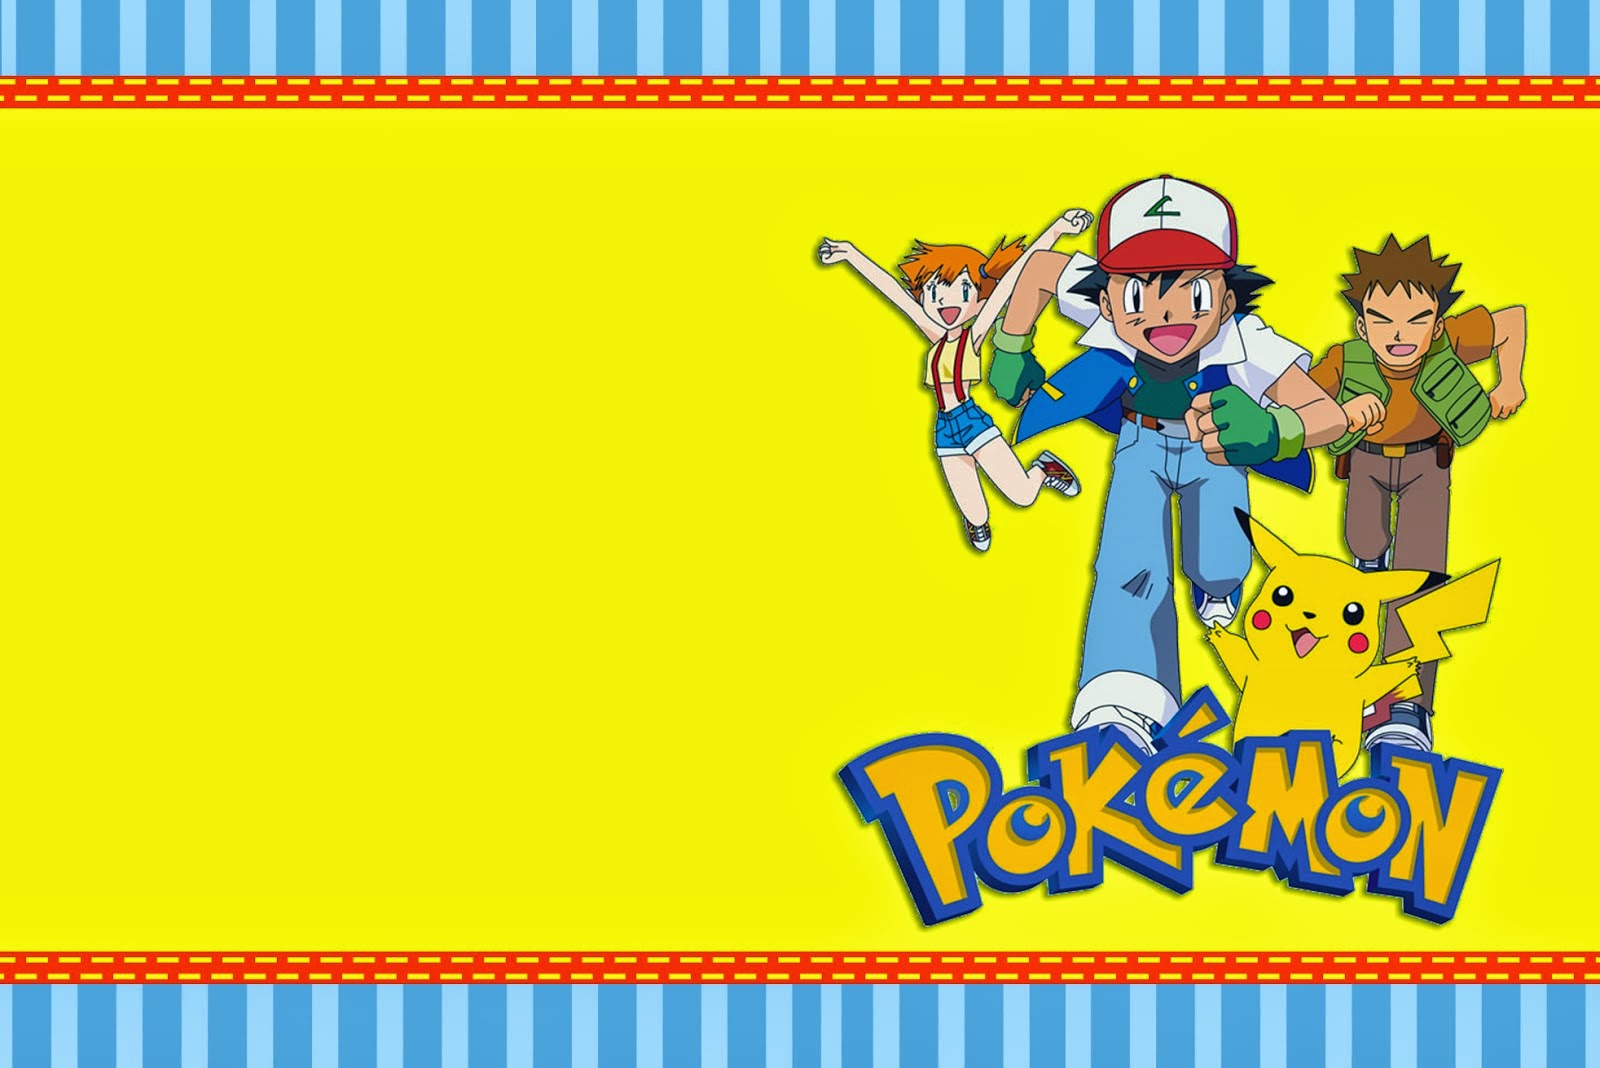 Pokemon: Free Printable Invitations, Labels or Cards.